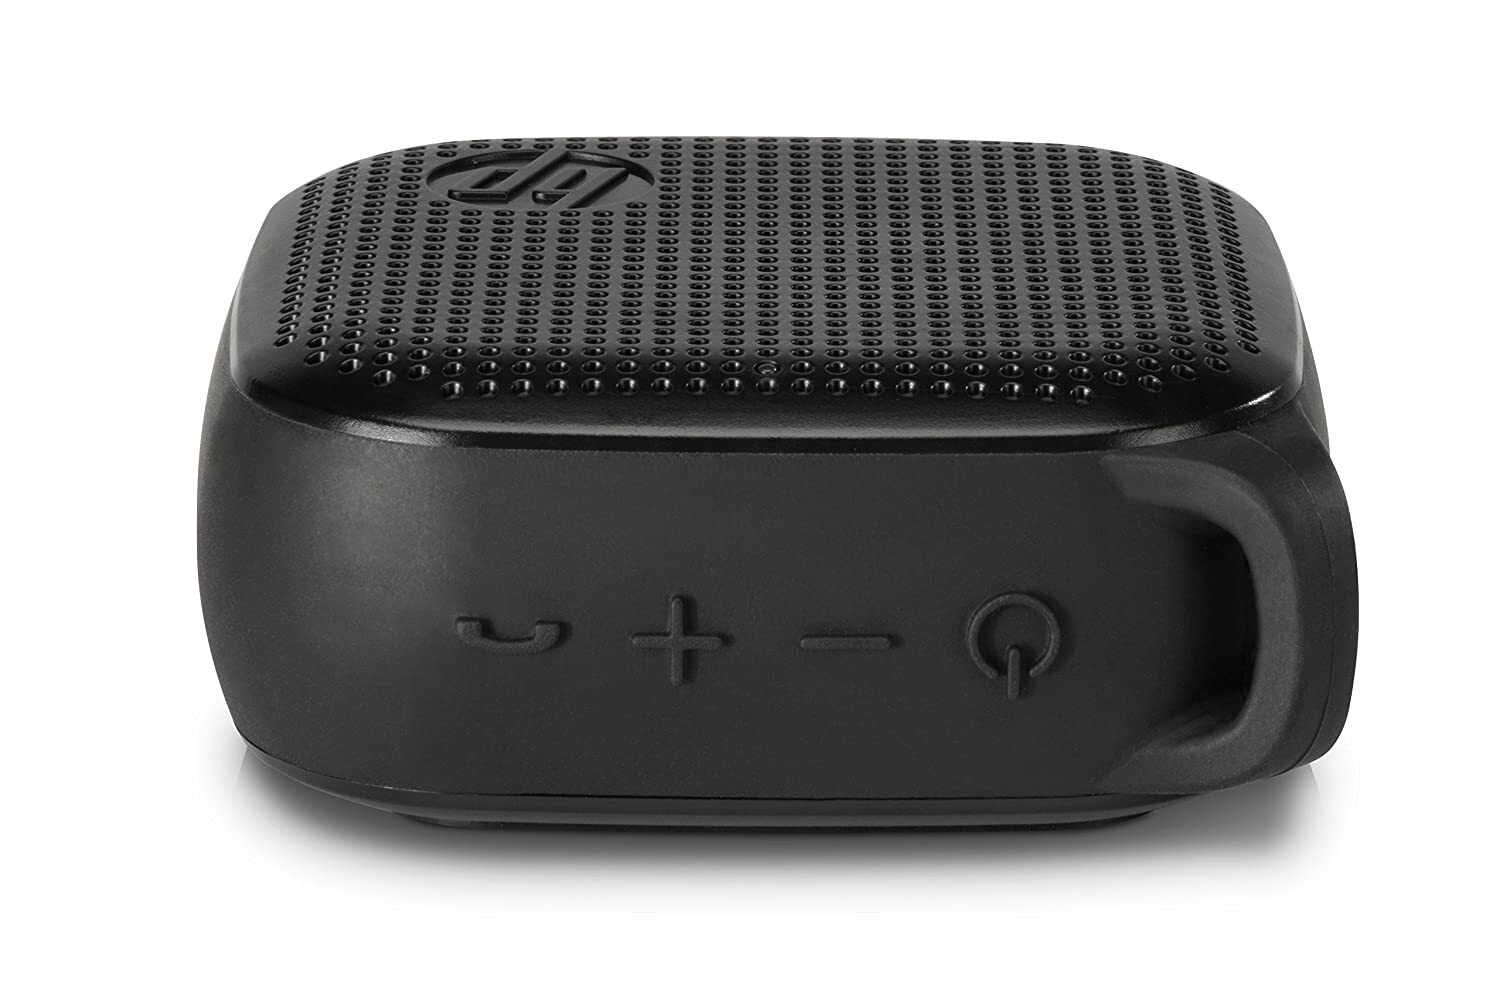 HP Mini 300 Bluetooth Speakers with AUX Connectivity and Splash Resistance, Black